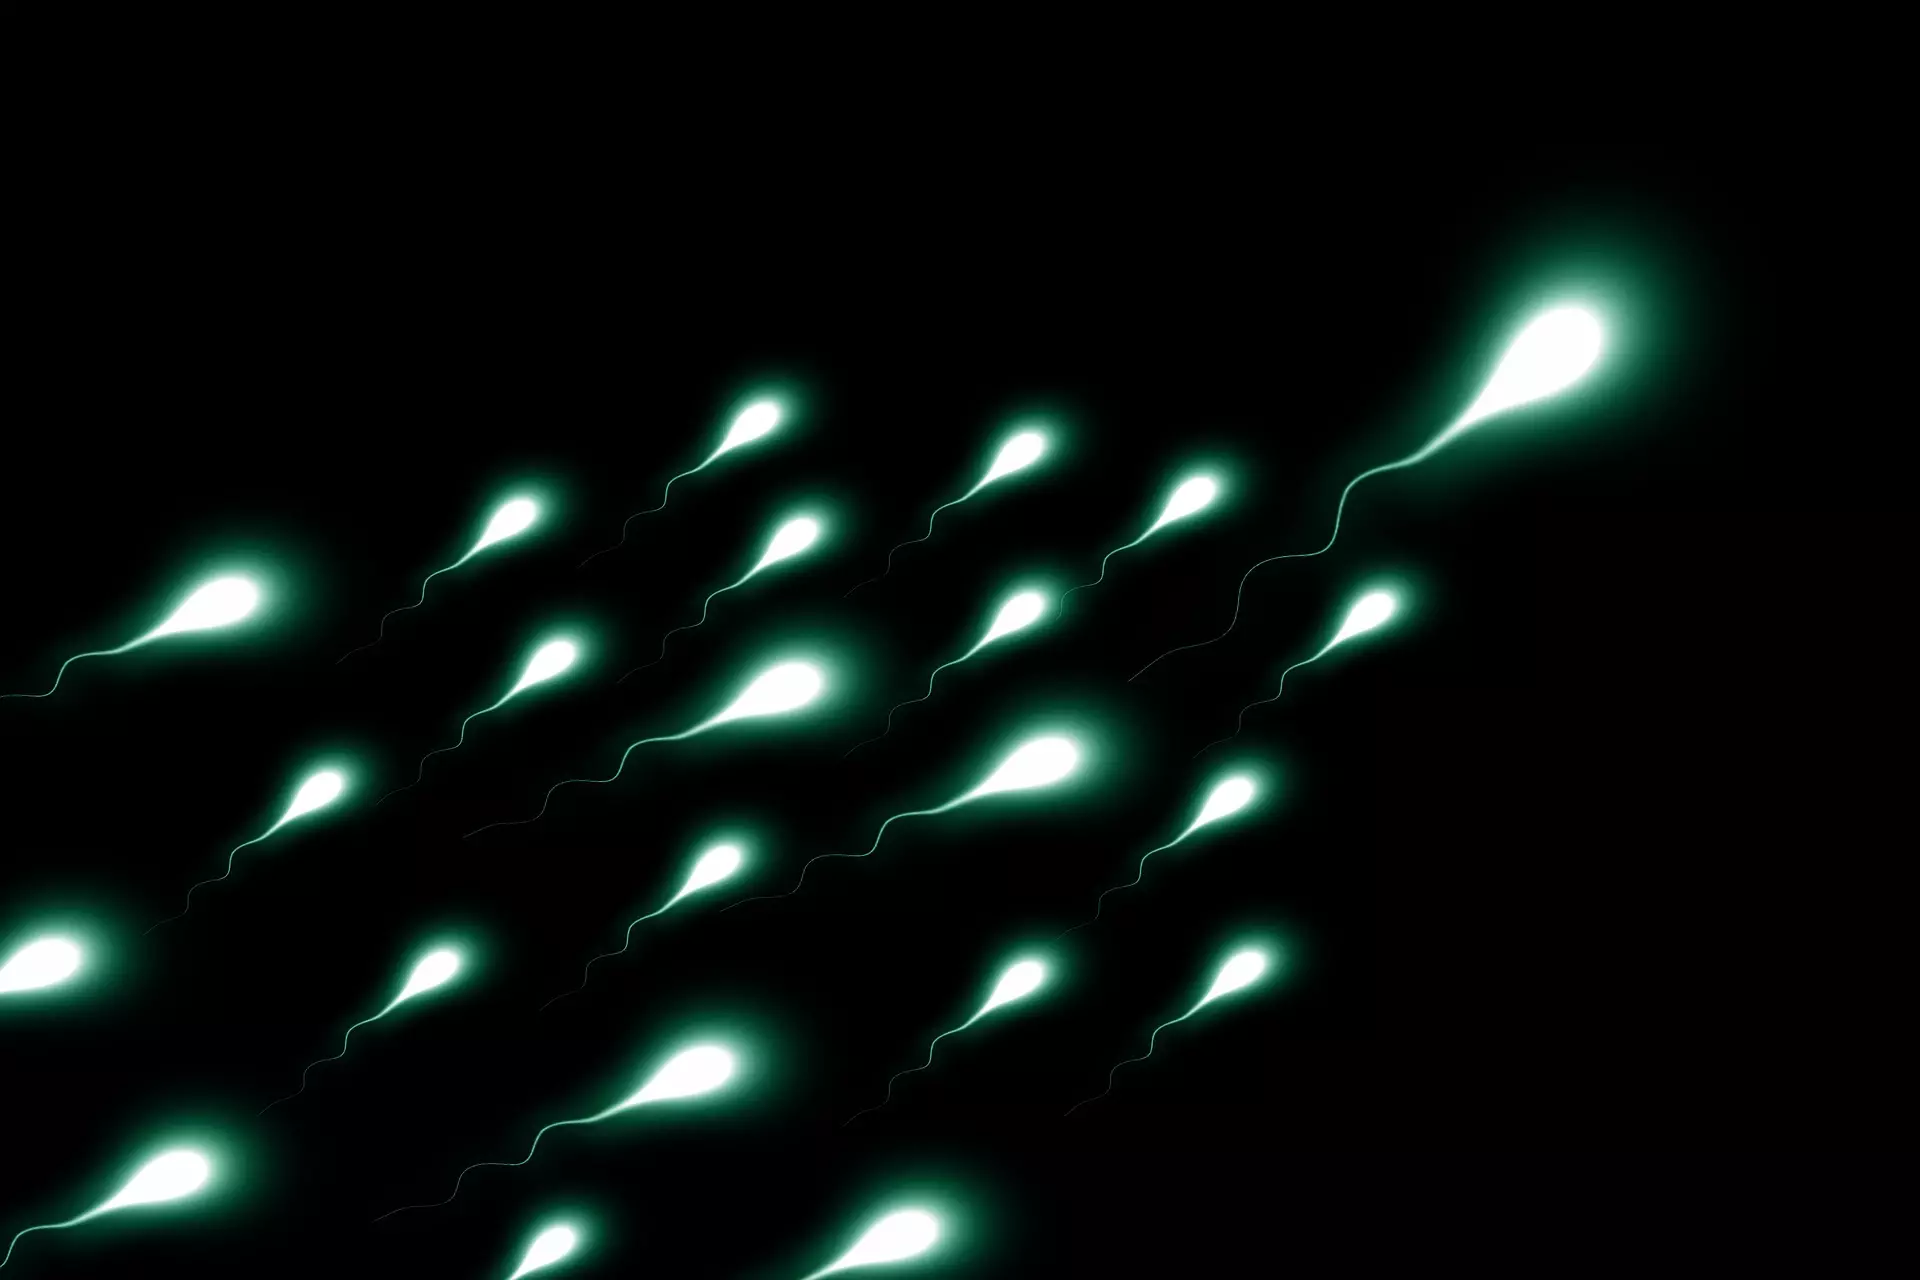 Whilst sperm needs to be kept cool, some studies suggest Christmas can mean lower quality sperm, perhaps due to men drinking more and exercising less (